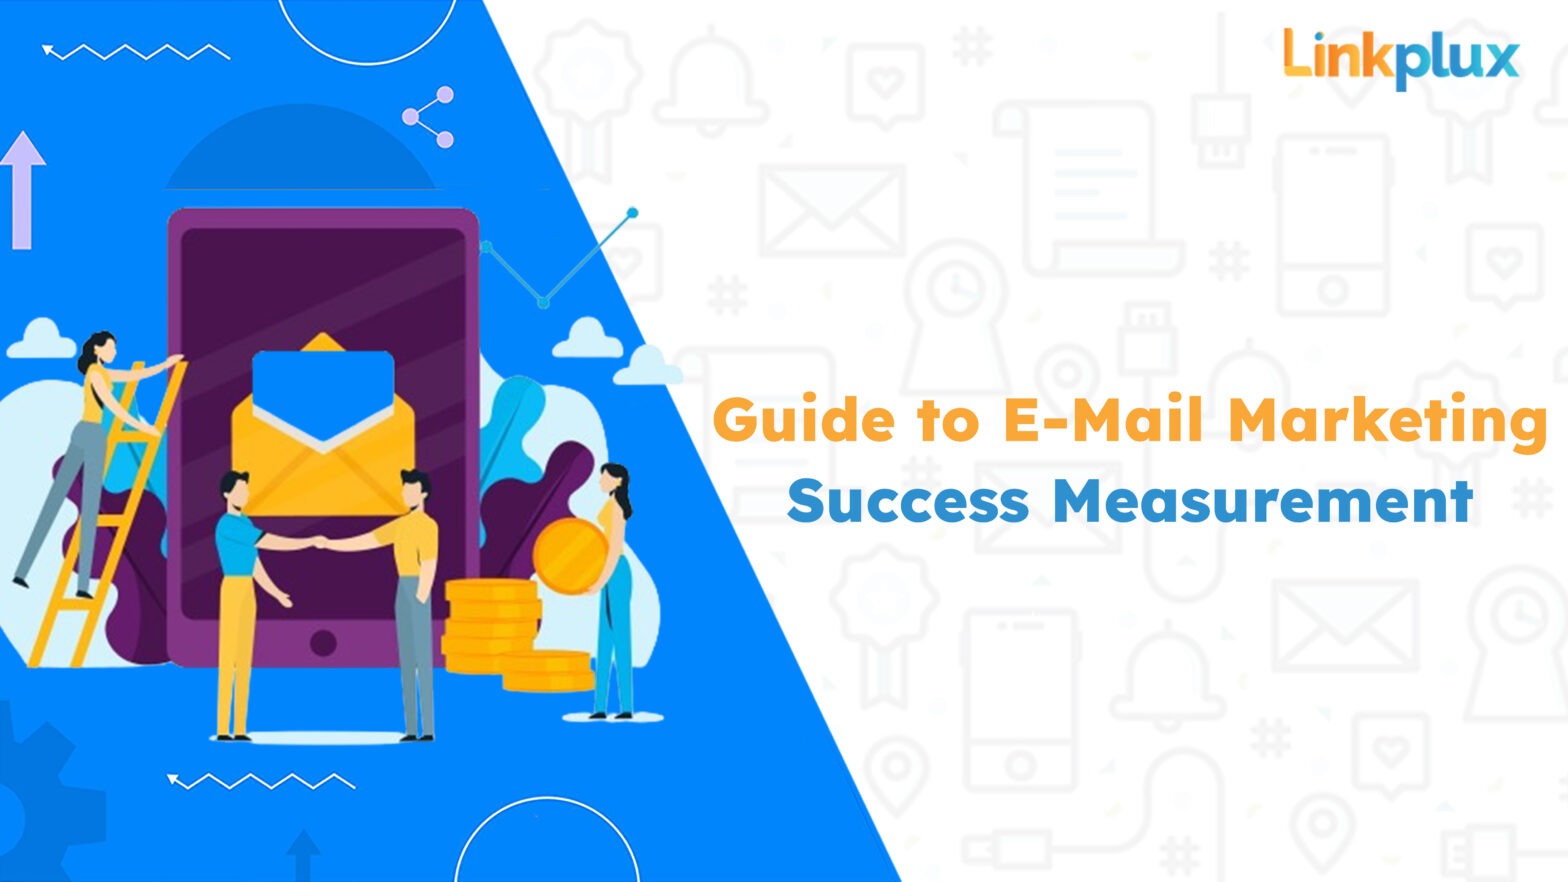 Guide to Email marketing success